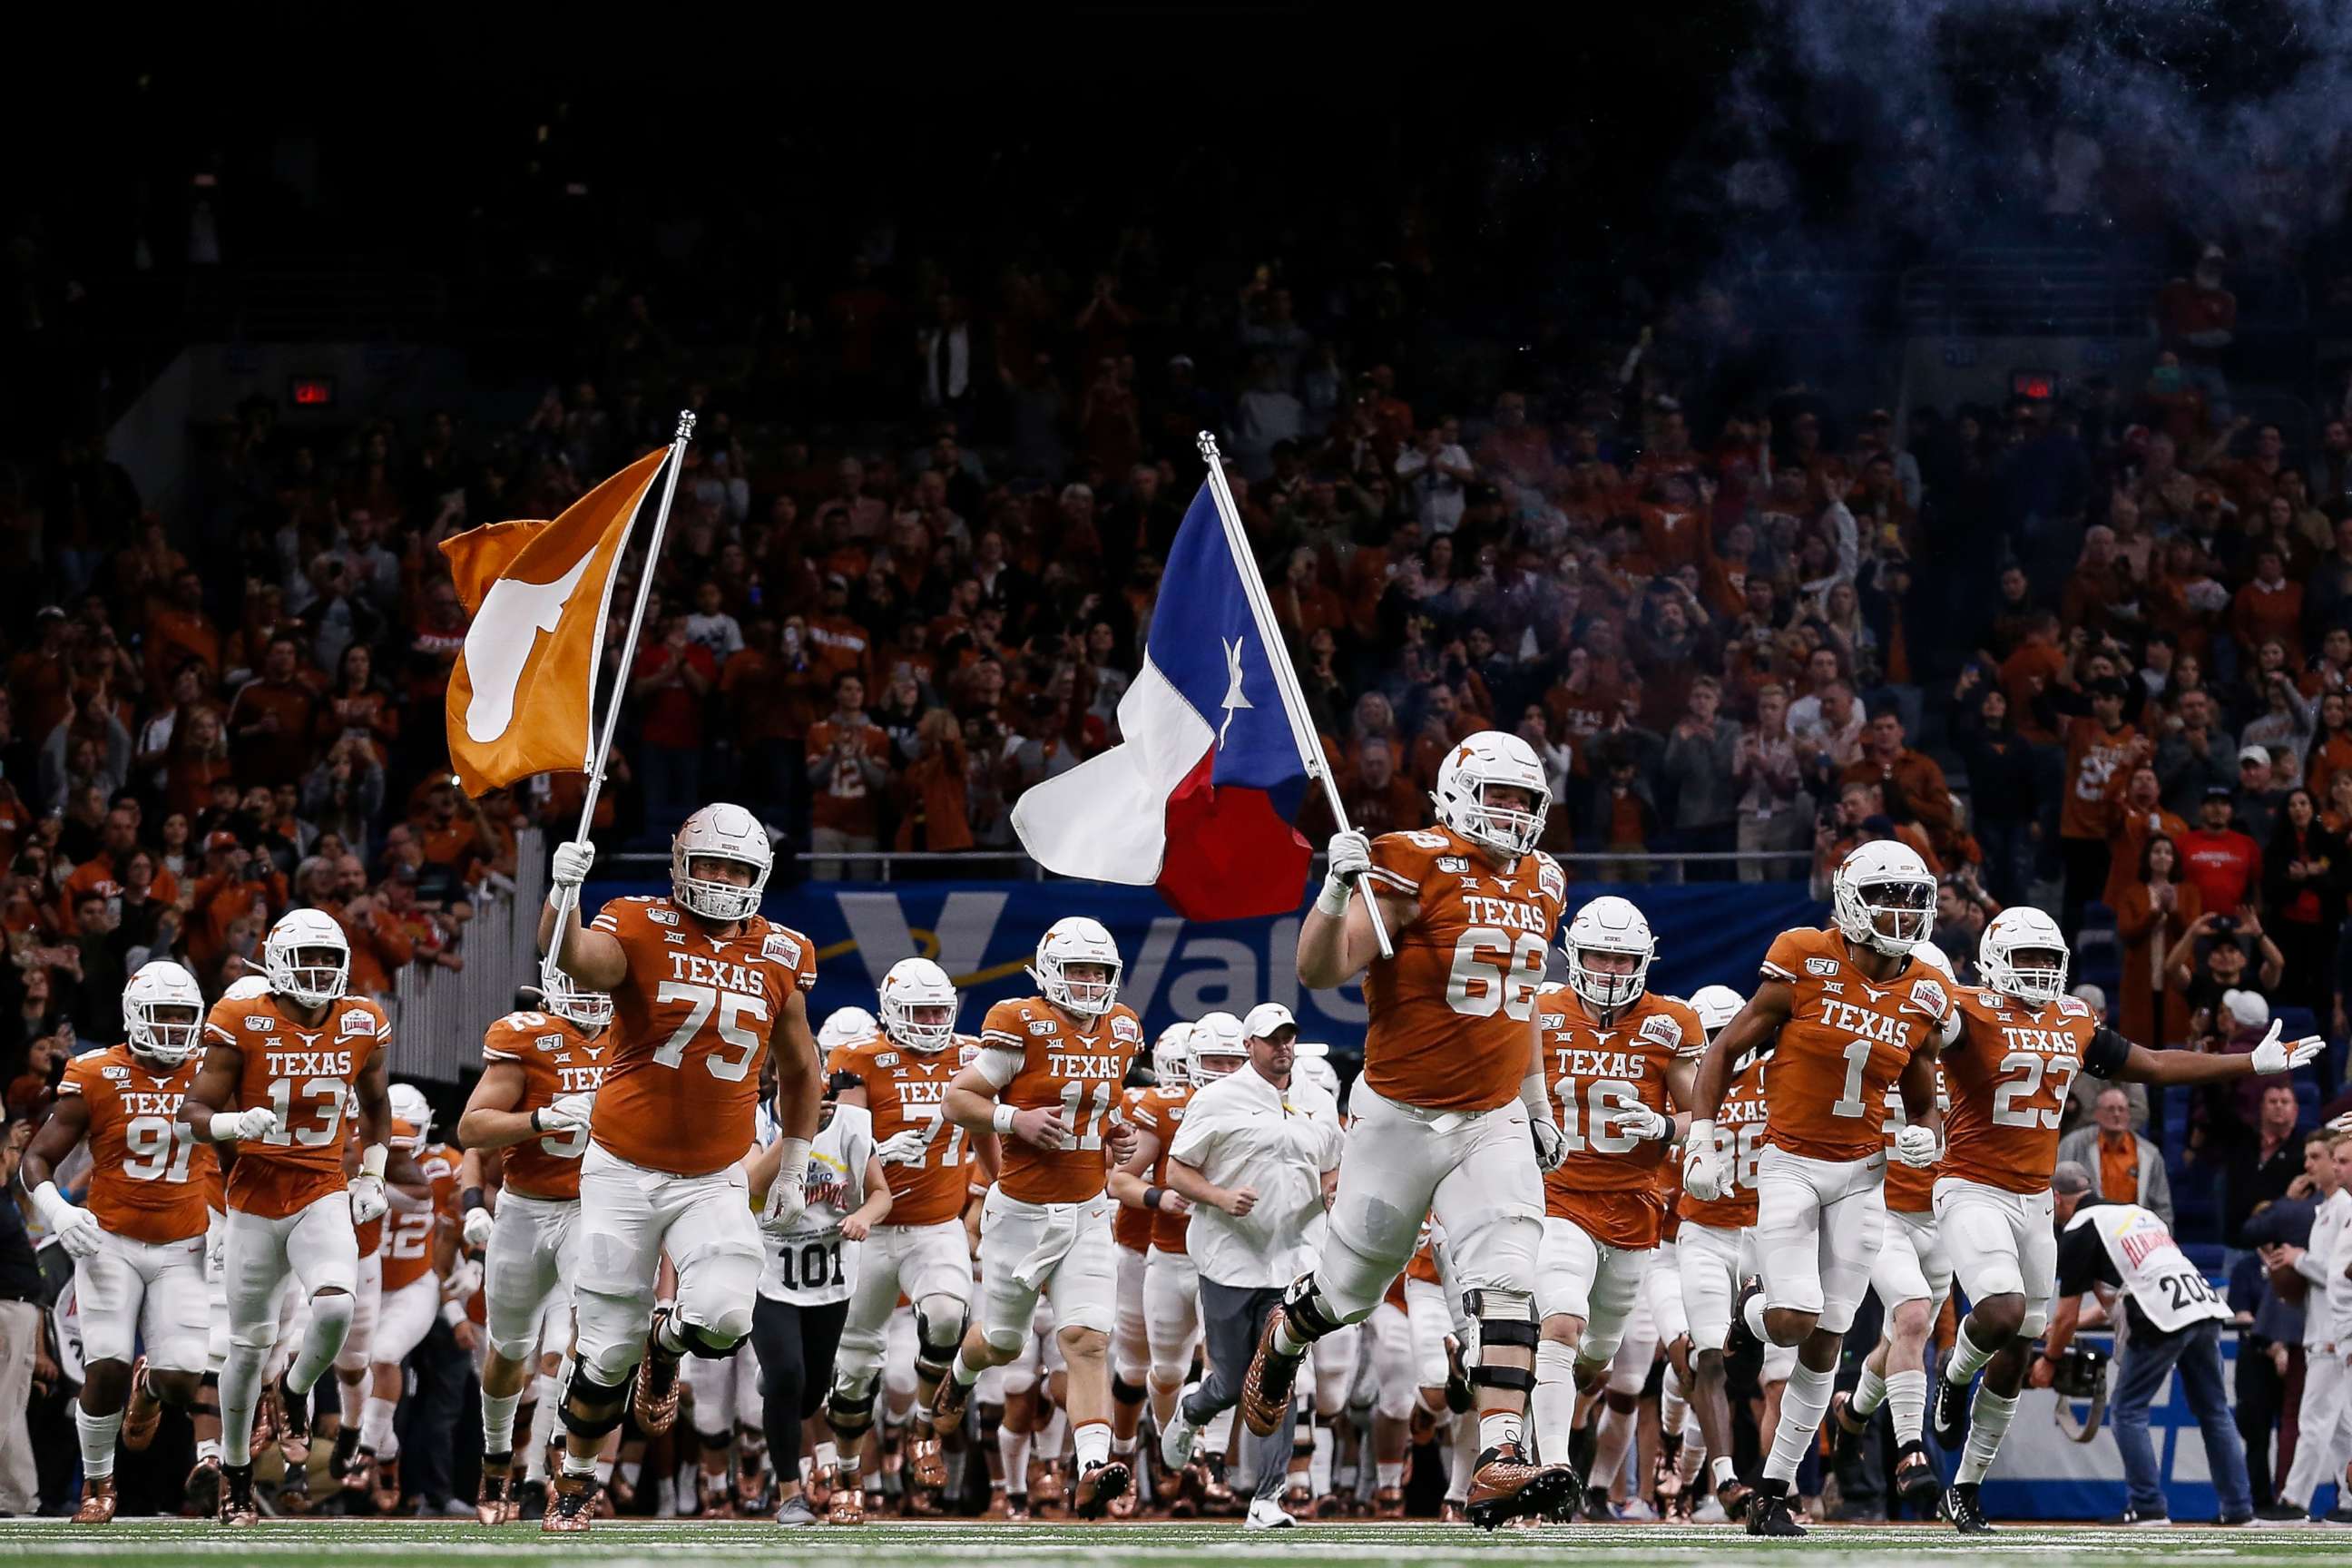 PHOTO: The Texas Longhorns take the field during the Valero Alamo Bowl against the Utah Utes at the Alamodome on December 31, 2019 in San Antonio, Texas.